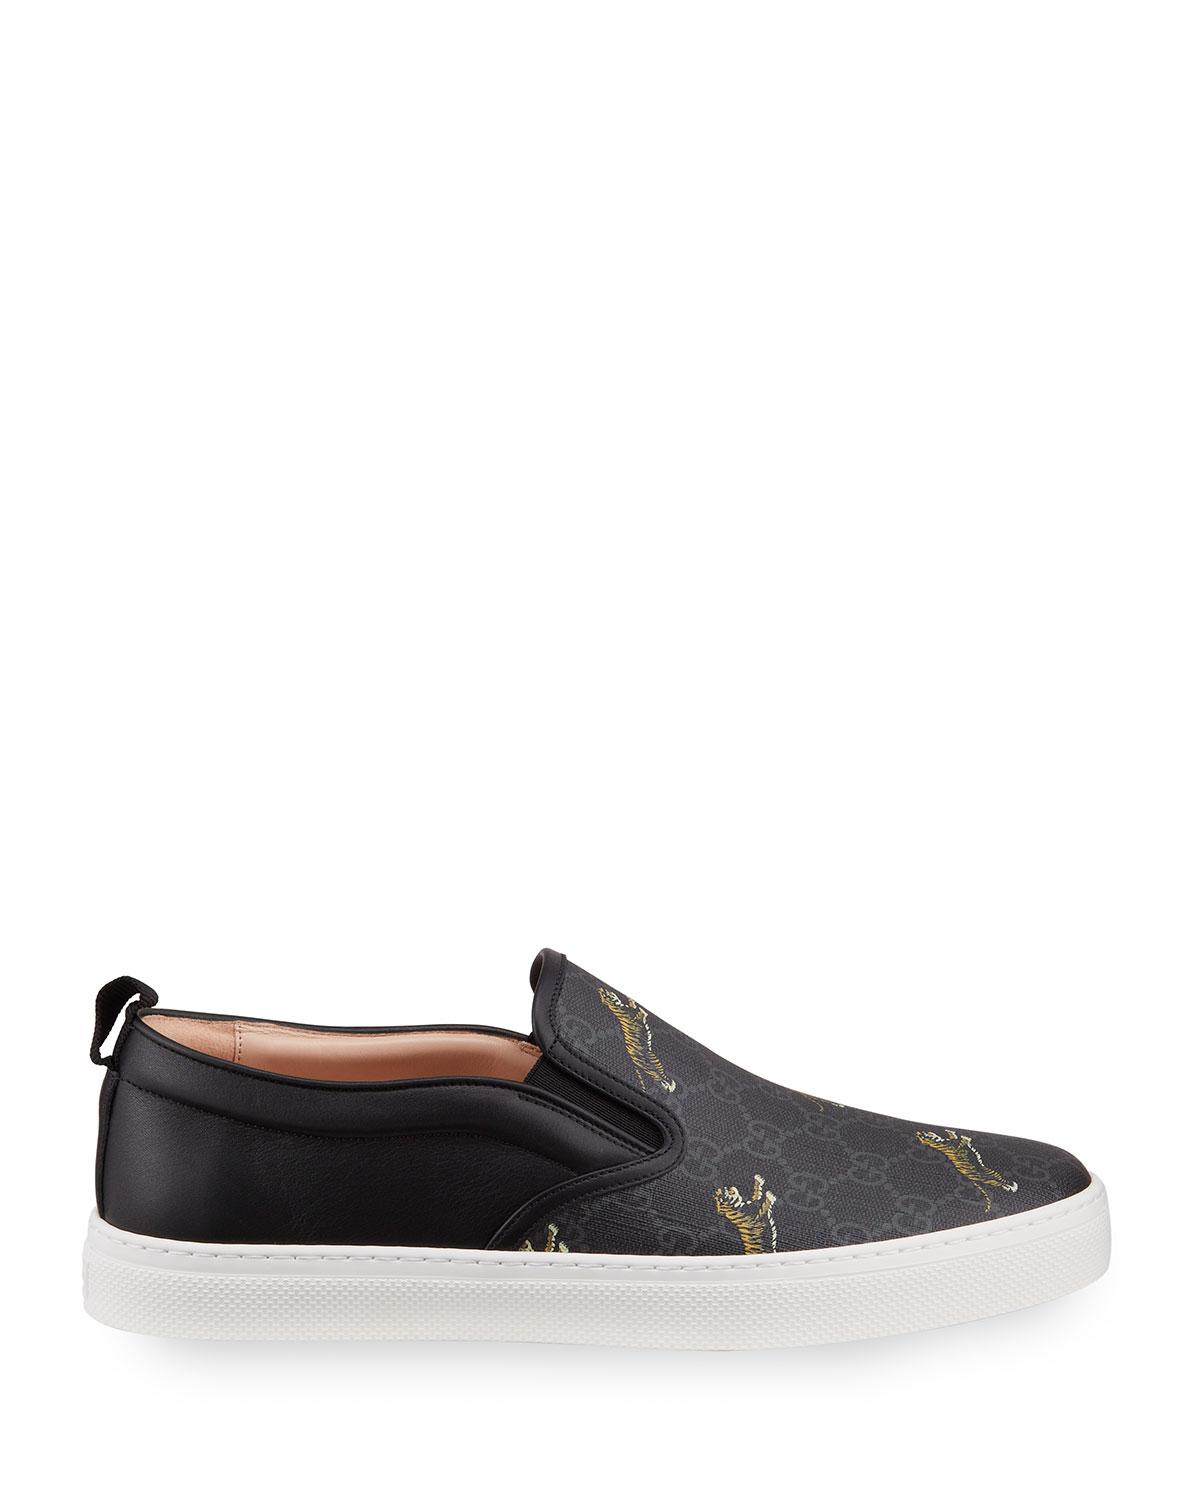 Gucci Slip-on Sneaker With Tigers in Black for Men | Lyst